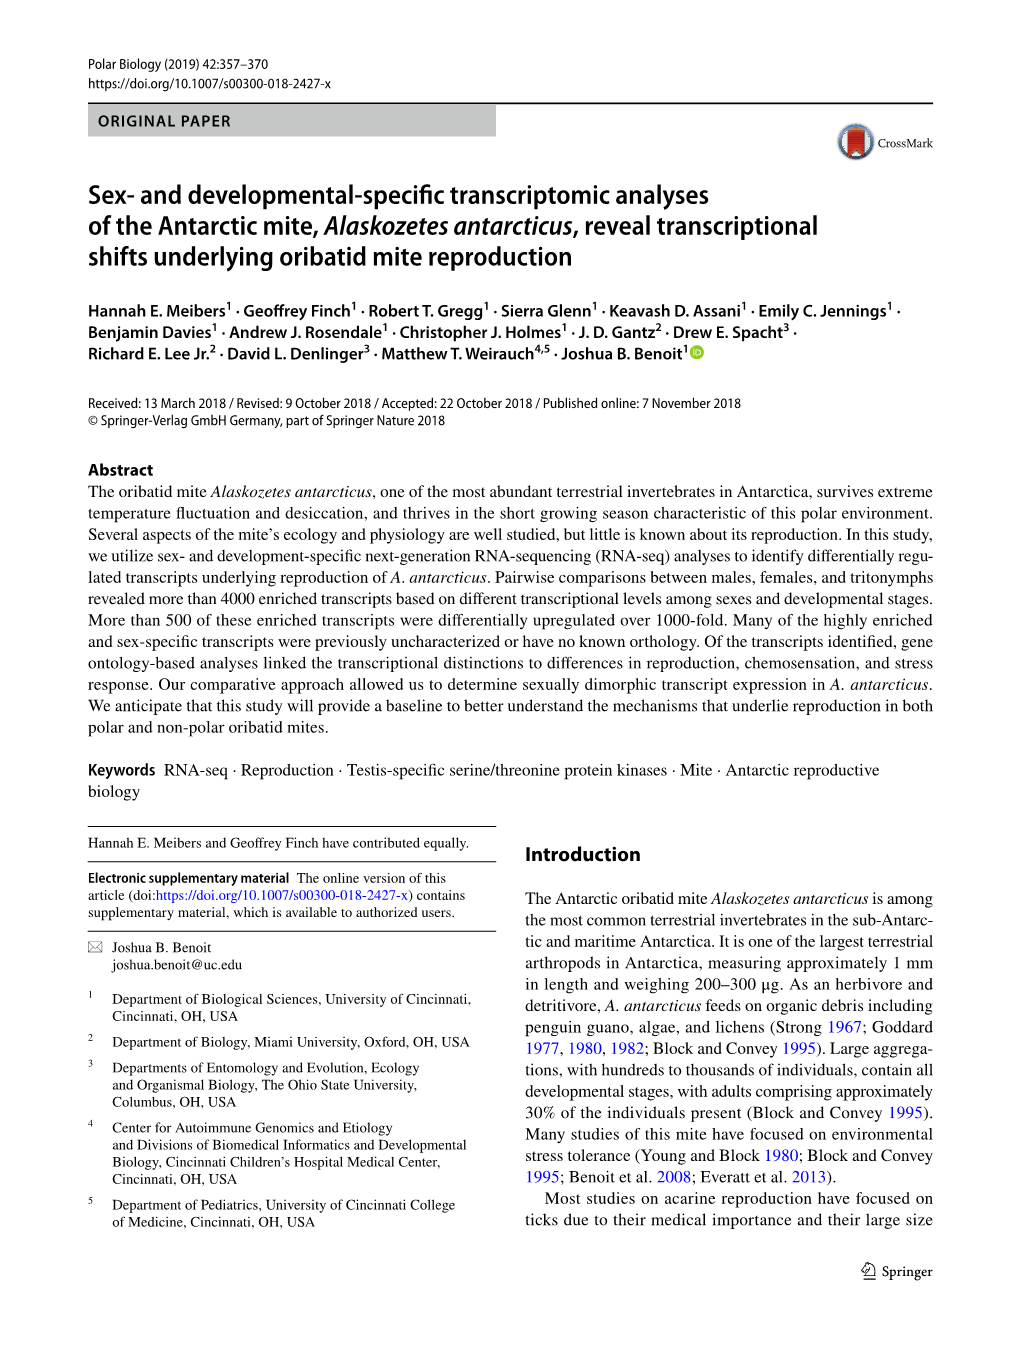 Sex- and Developmental-Specific Transcriptomic Analyses of The